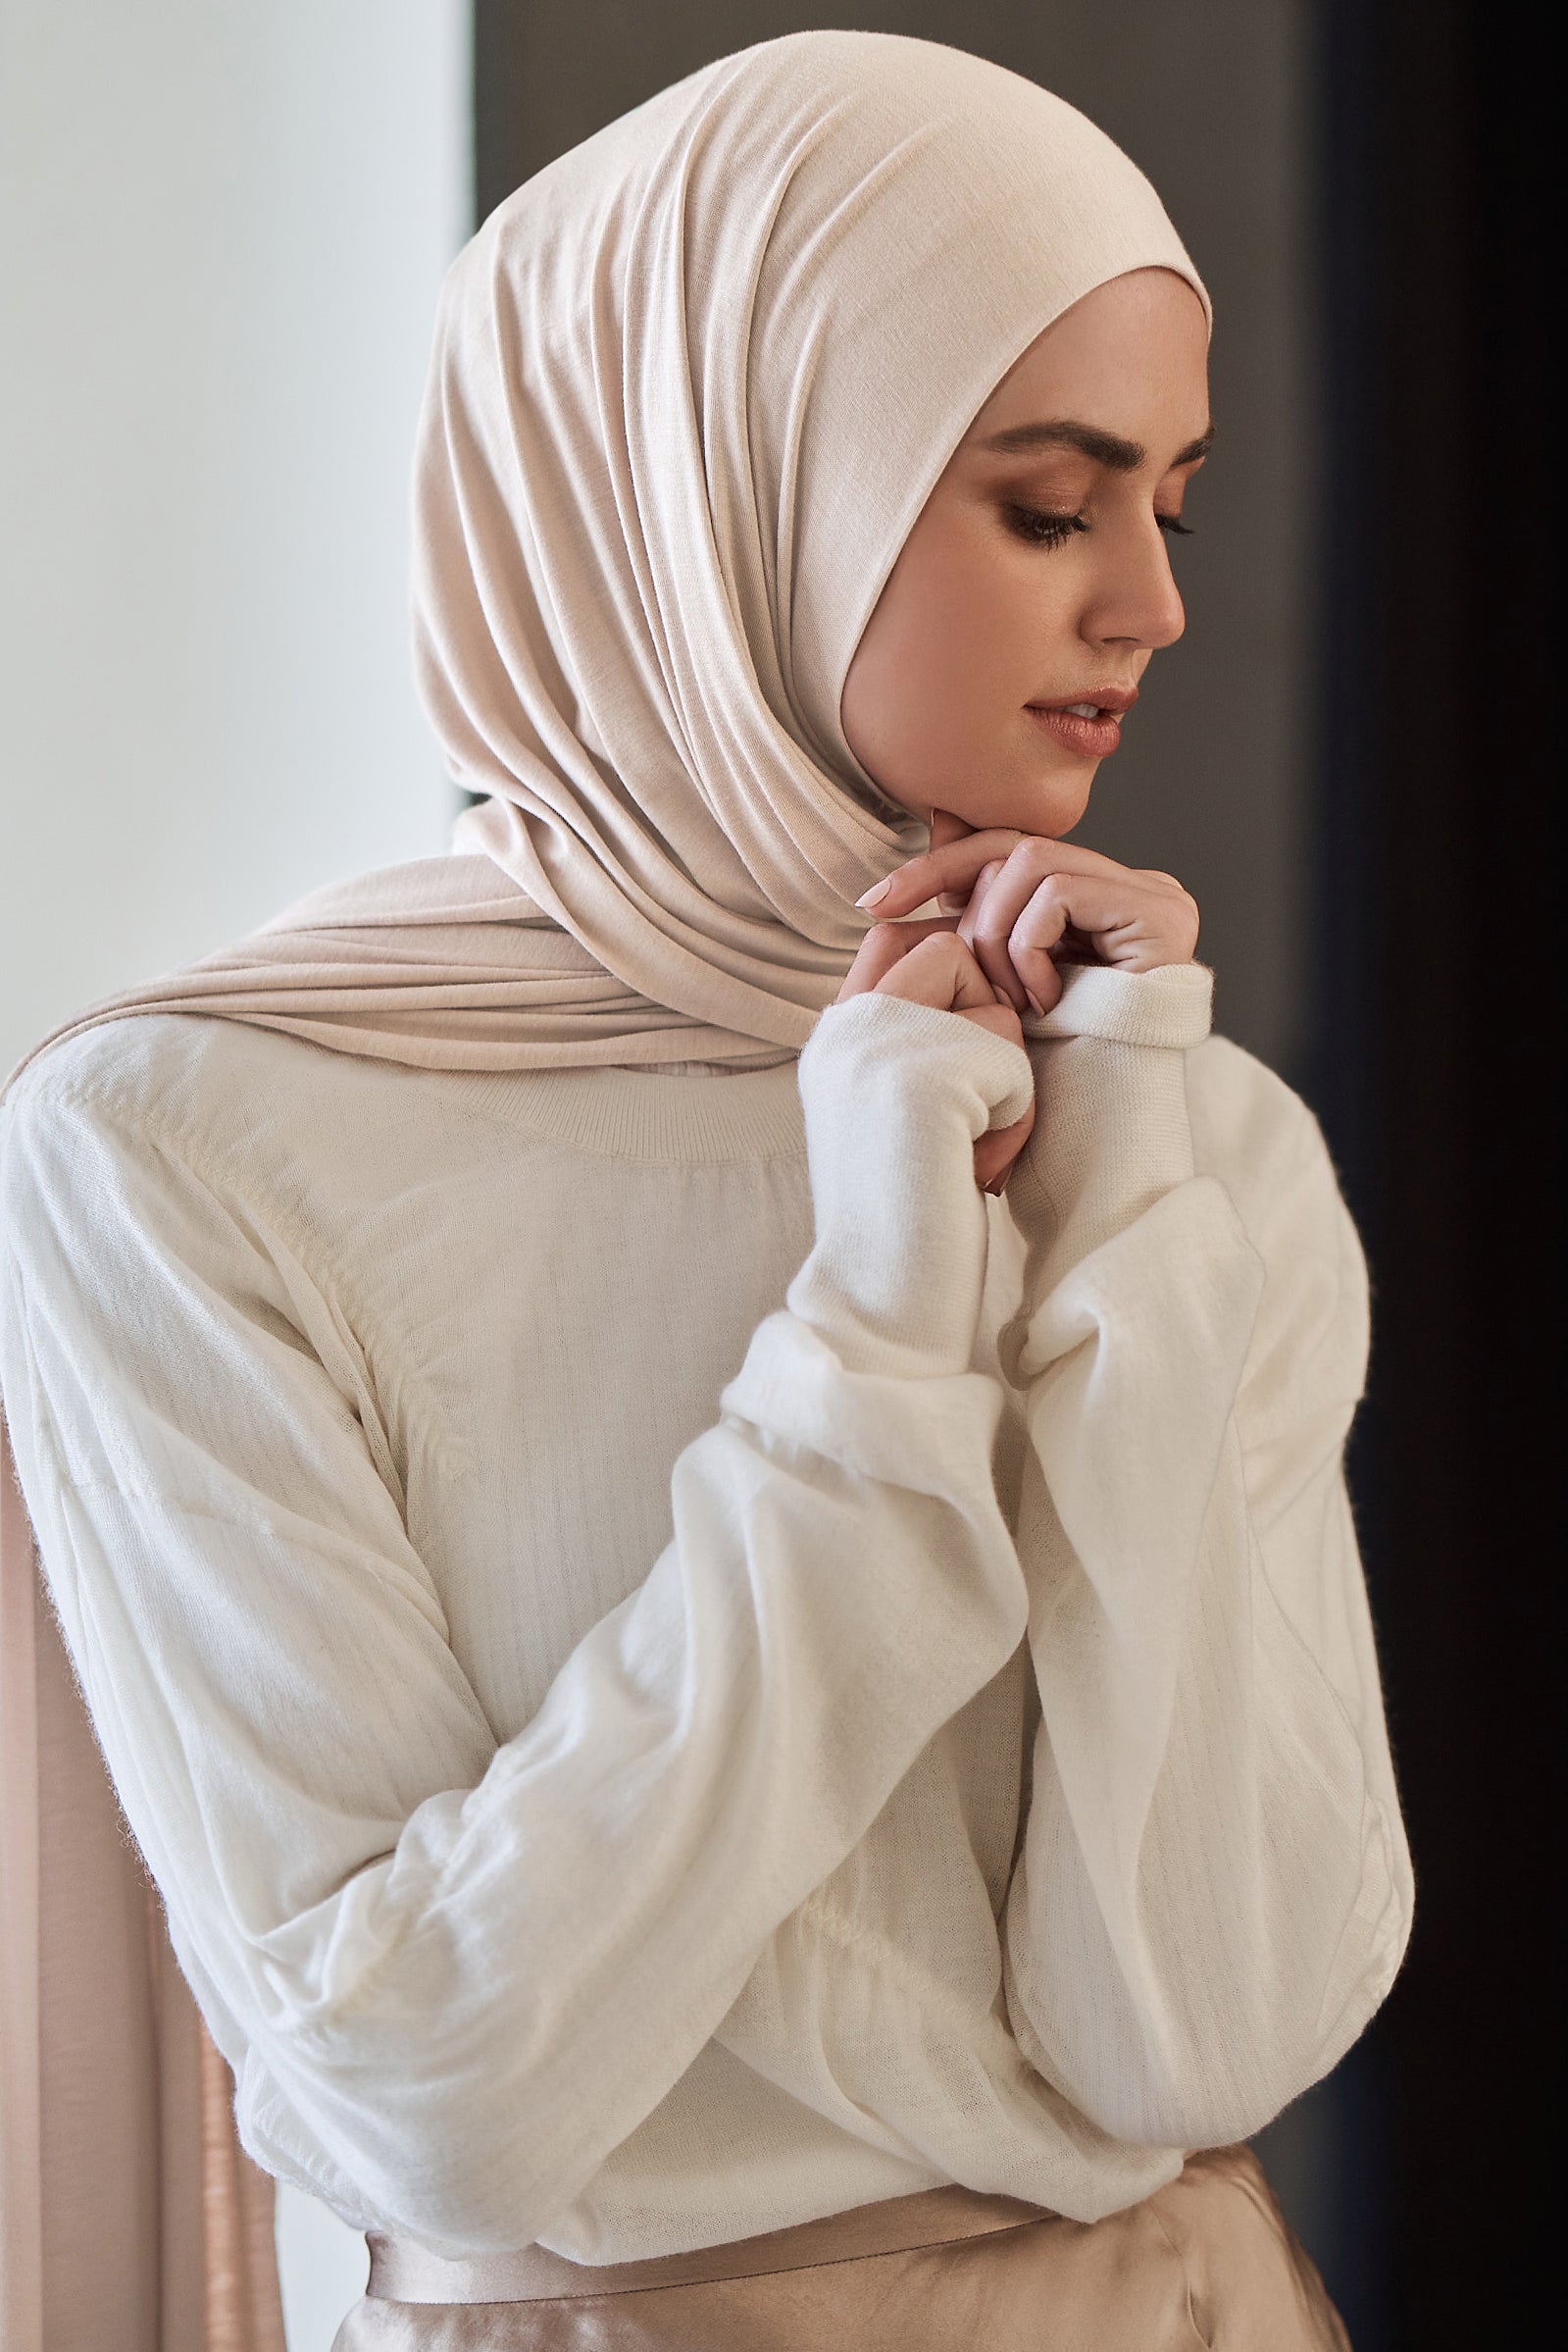 Can I, as a white person, veil using a hijab? My religion says